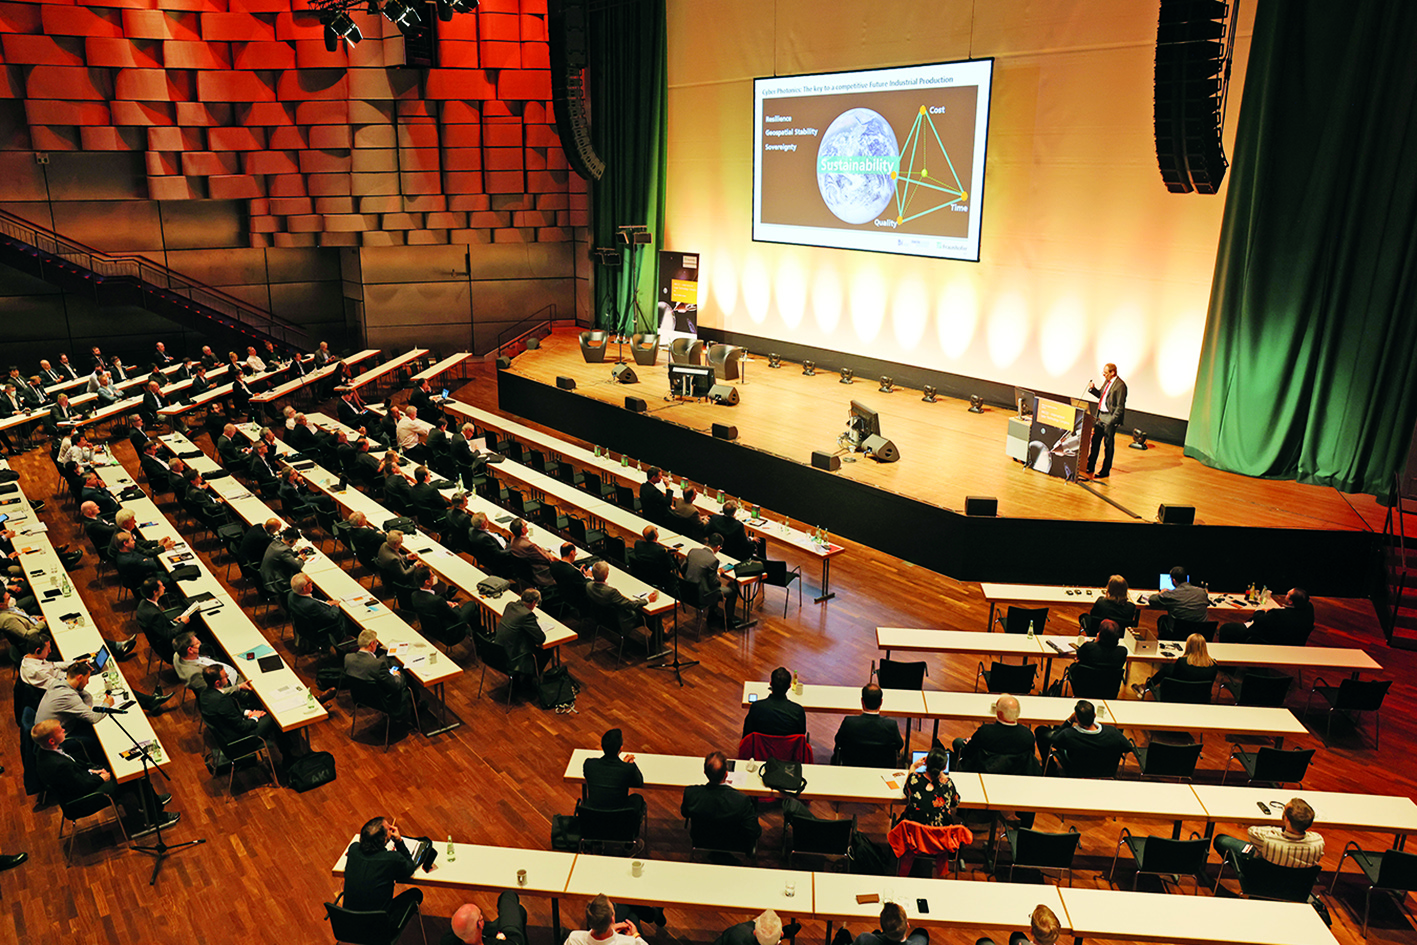 Prof. Constantin Häfner, head of Fraunhofer ILT, opened the technology conference of the “AKL'22 - International Laser Technology Congress” on May 5, 2022, in Aachen.